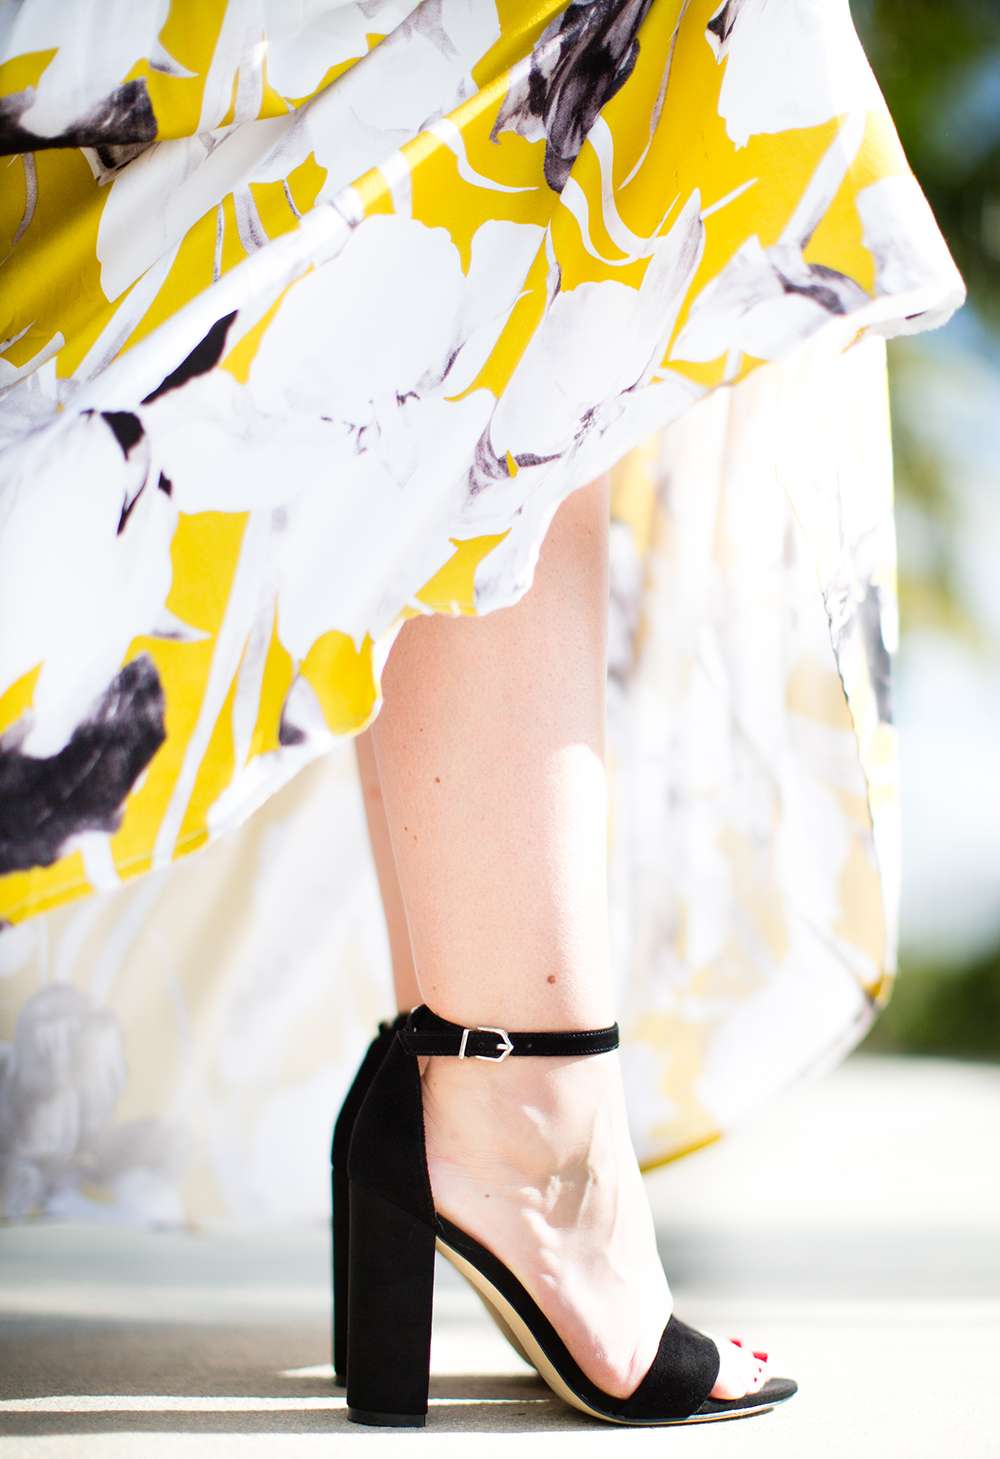 Mustard Floral Maxi | Living In Color Print